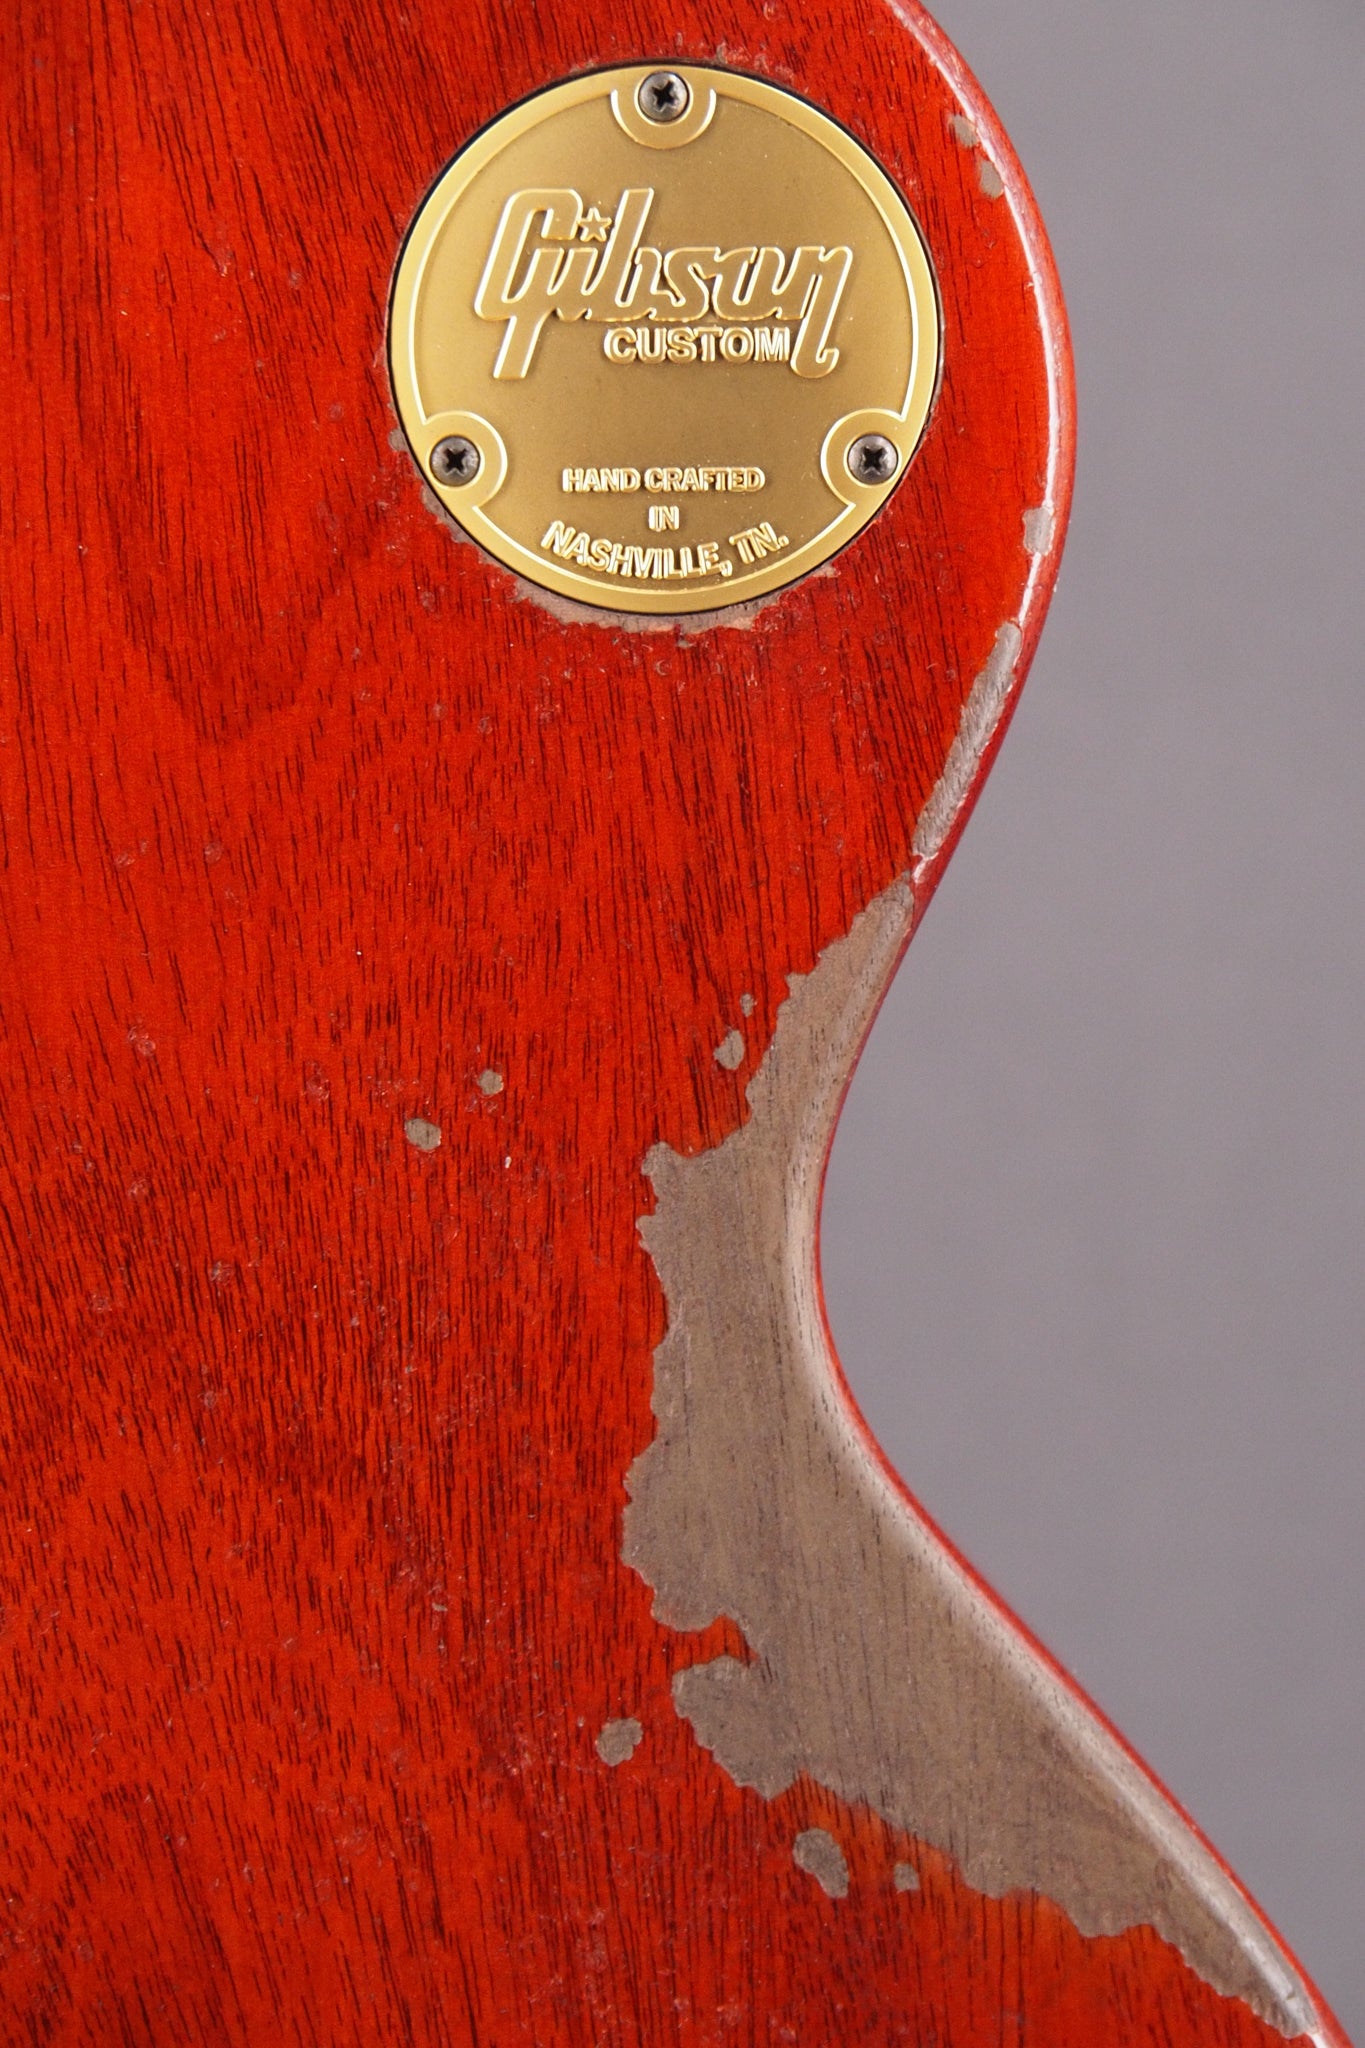 '59 Les Paul Reissue Limited Edition Brazilian Rosewood - Tom's Cherry